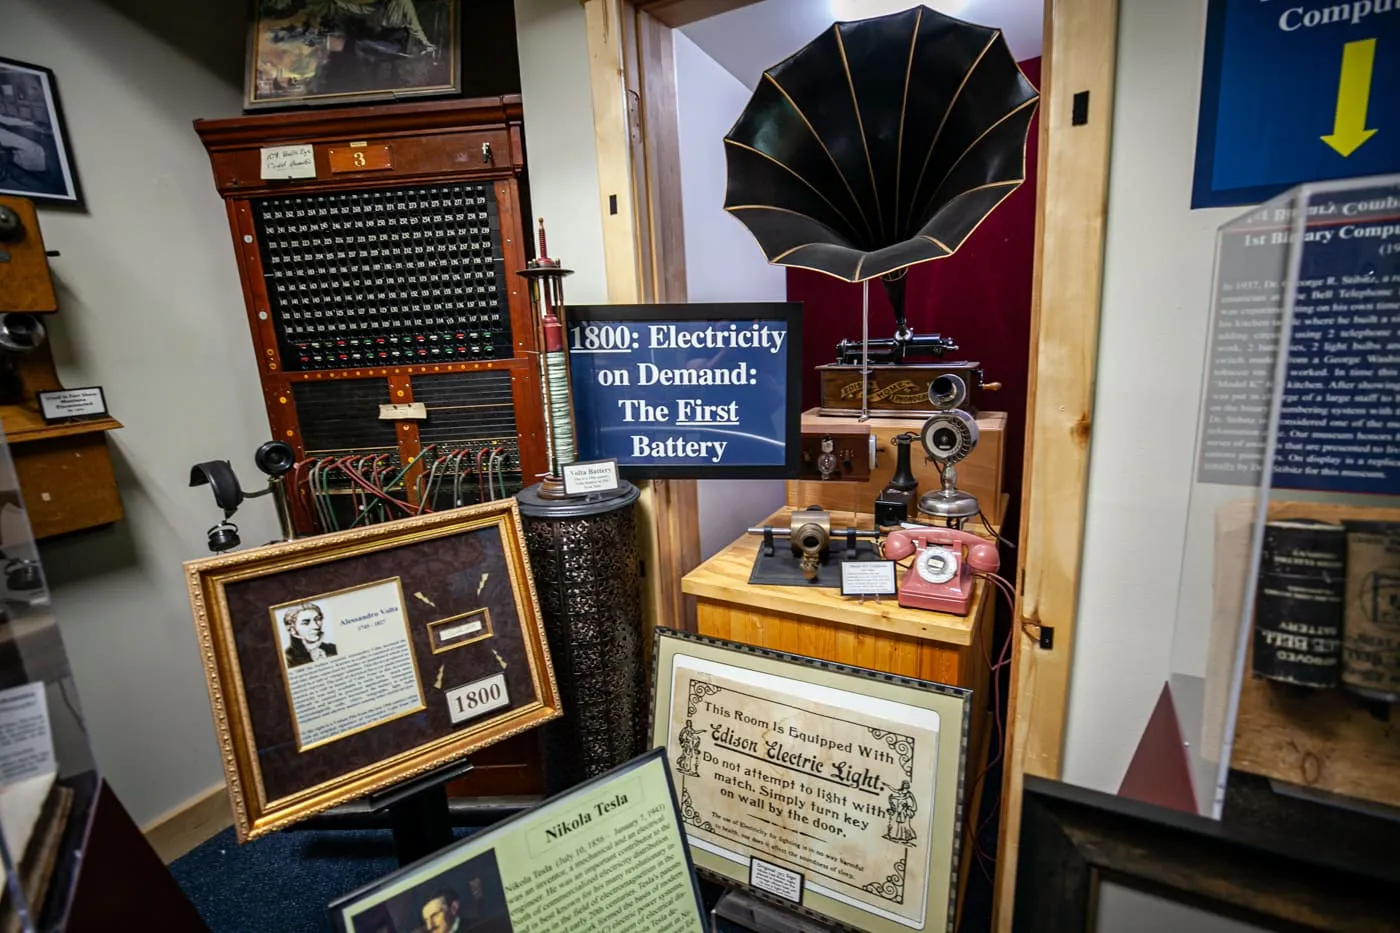 1800: Electricity on Demand: The First Battery - American Computer & Robotics Museum in Bozeman, Montana